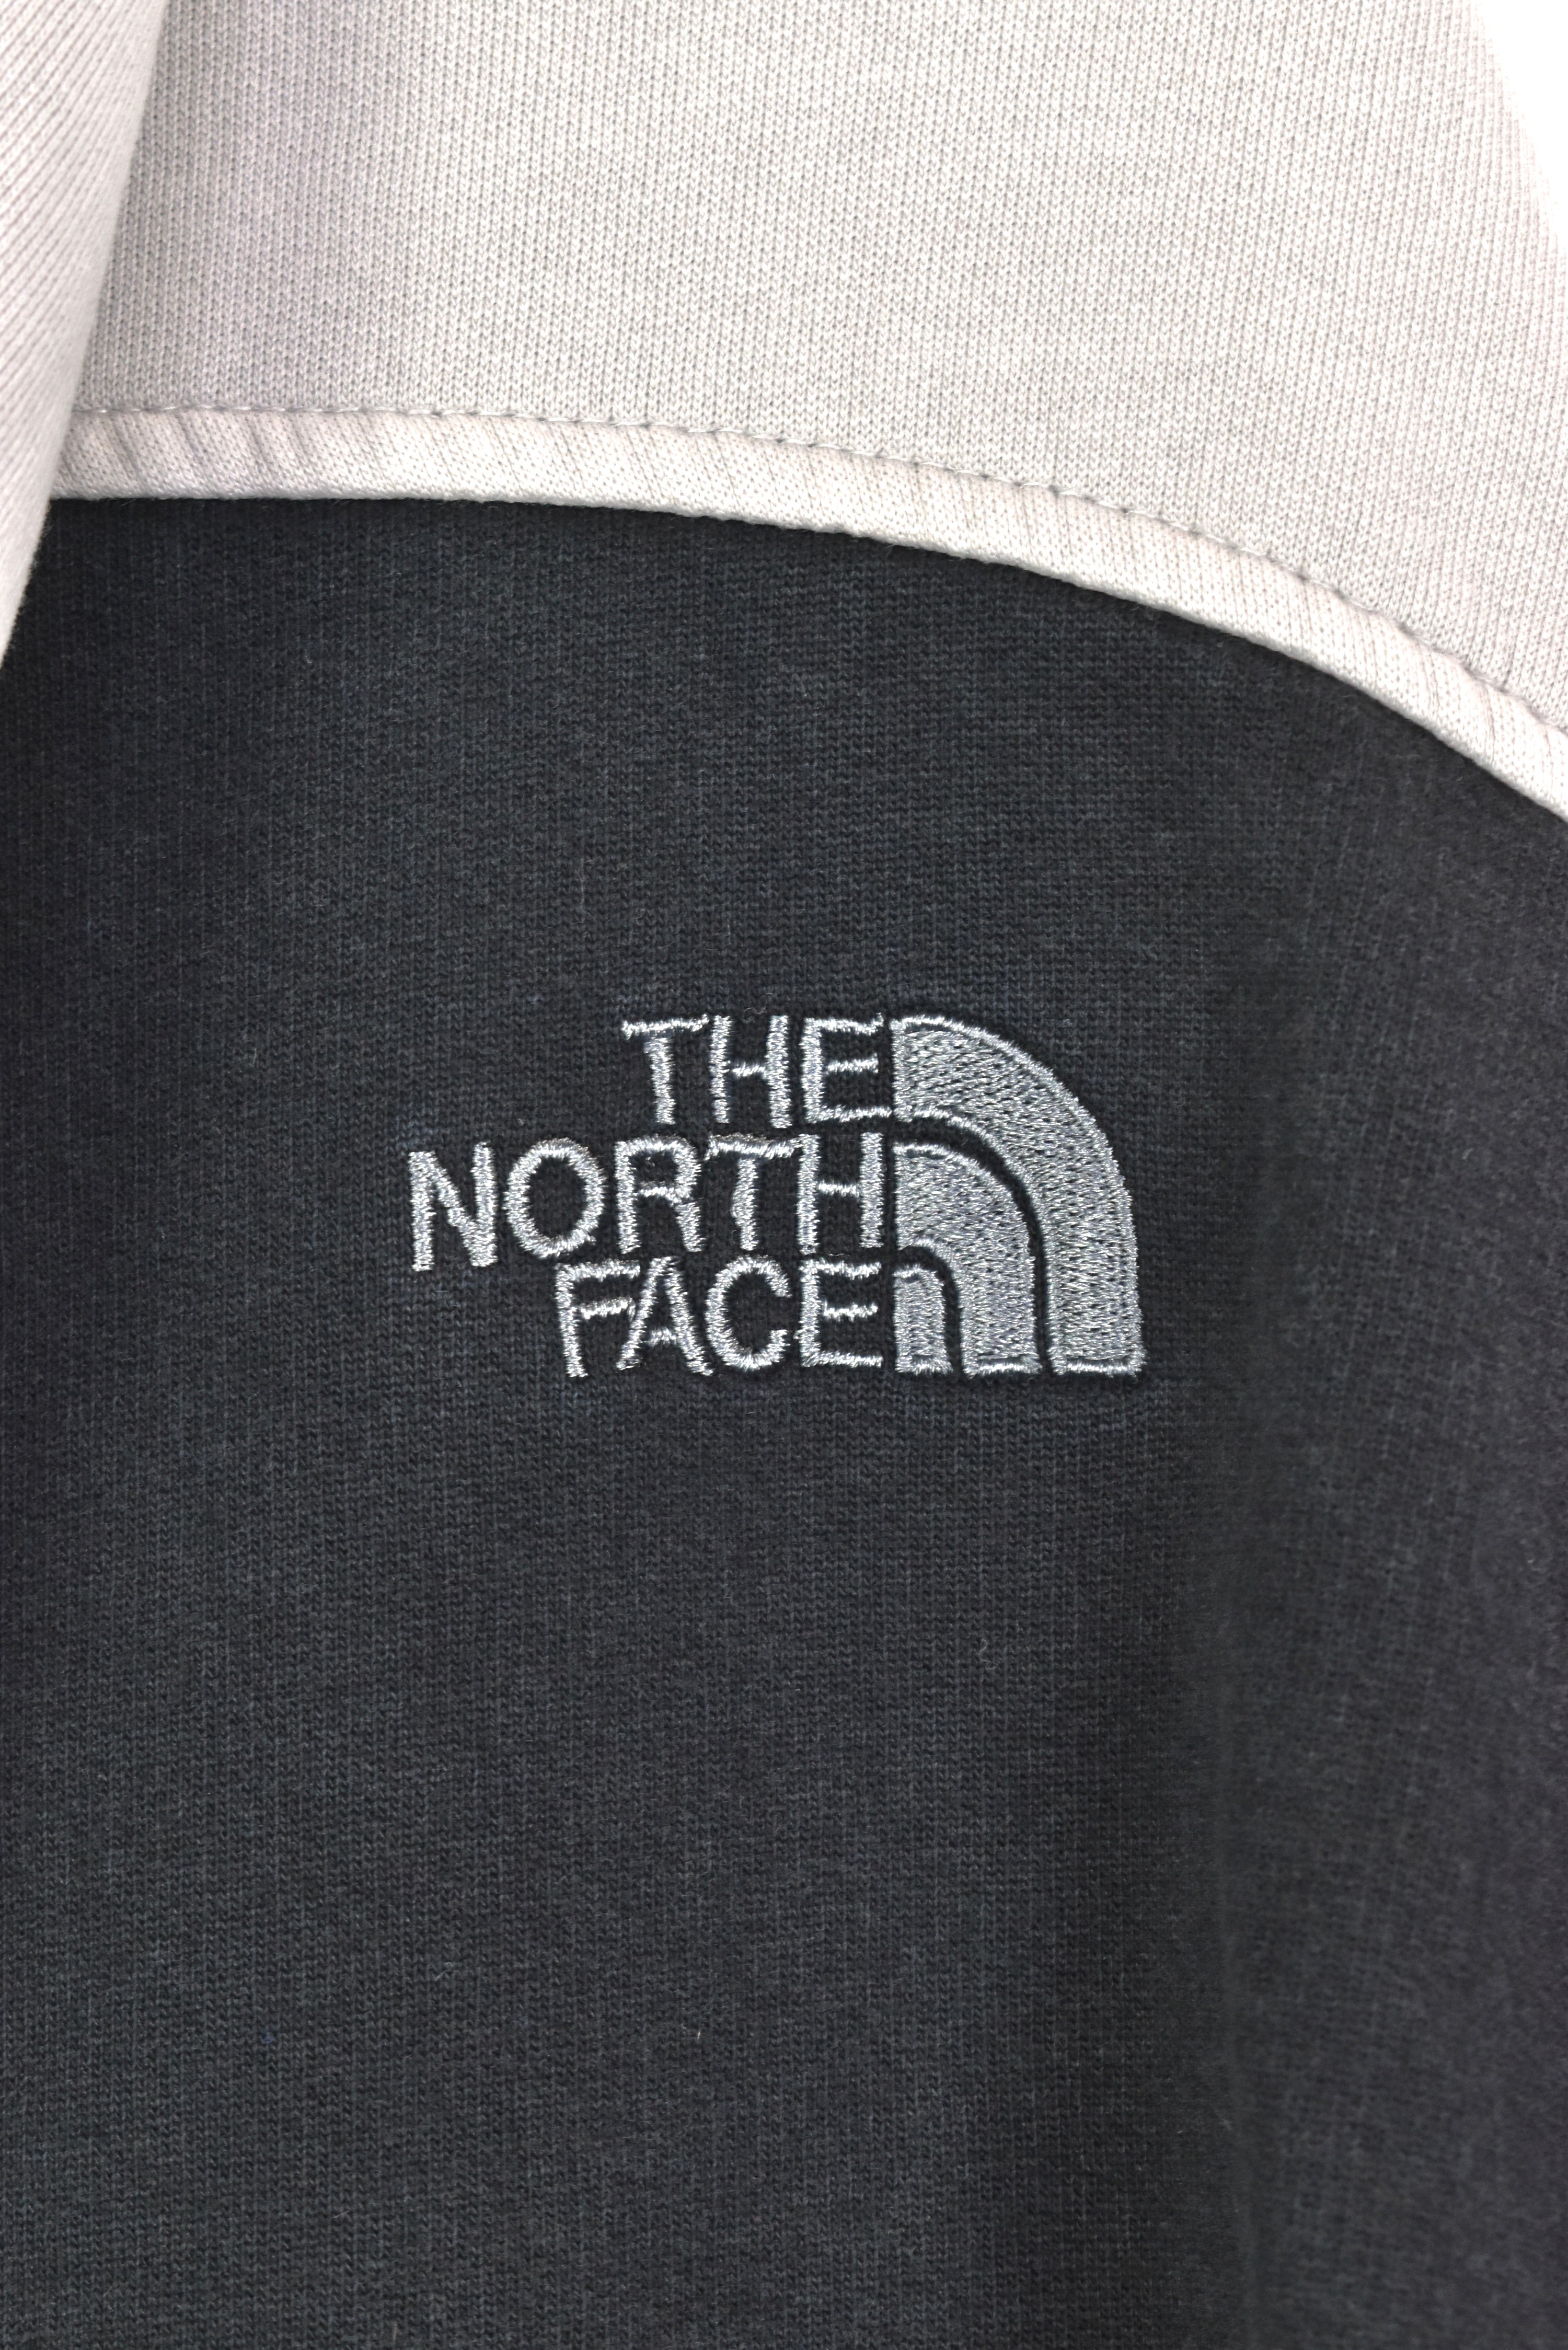 Vintage The North Face hoodie, full zip embroidered sweatshirt - XL, black THE NORTH FACE